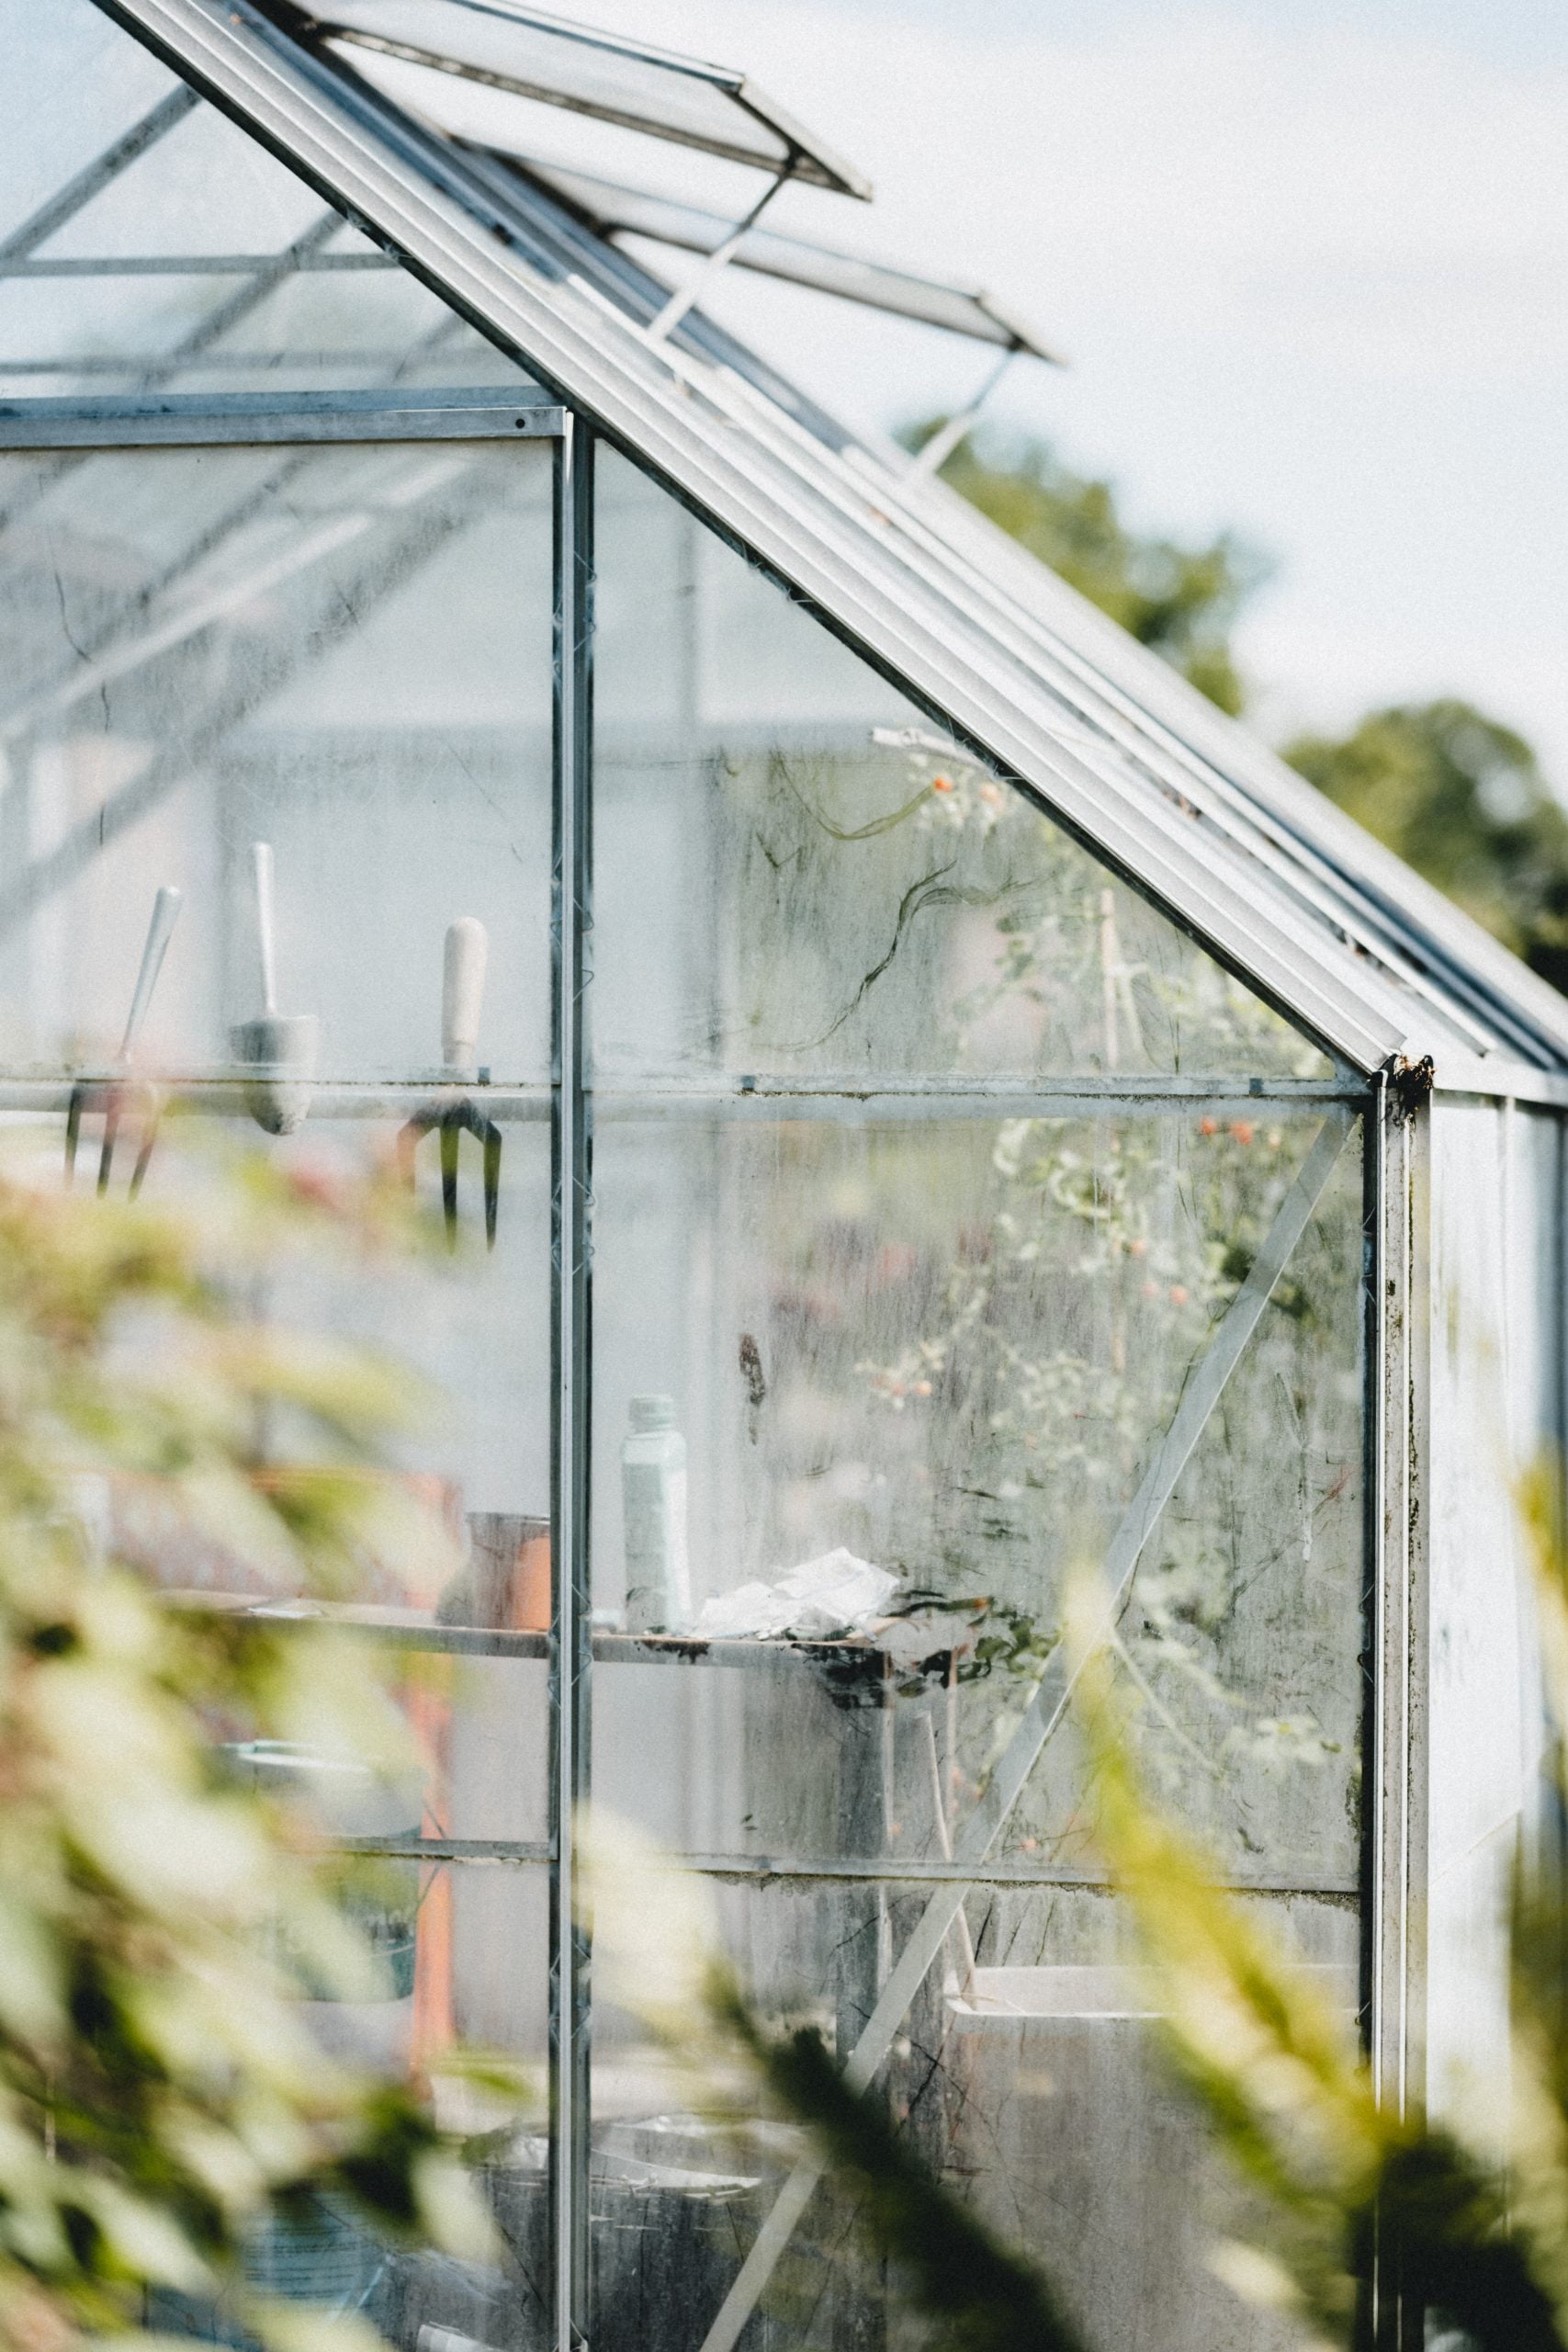 How Much Warmer Is An Unheated Greenhouse?